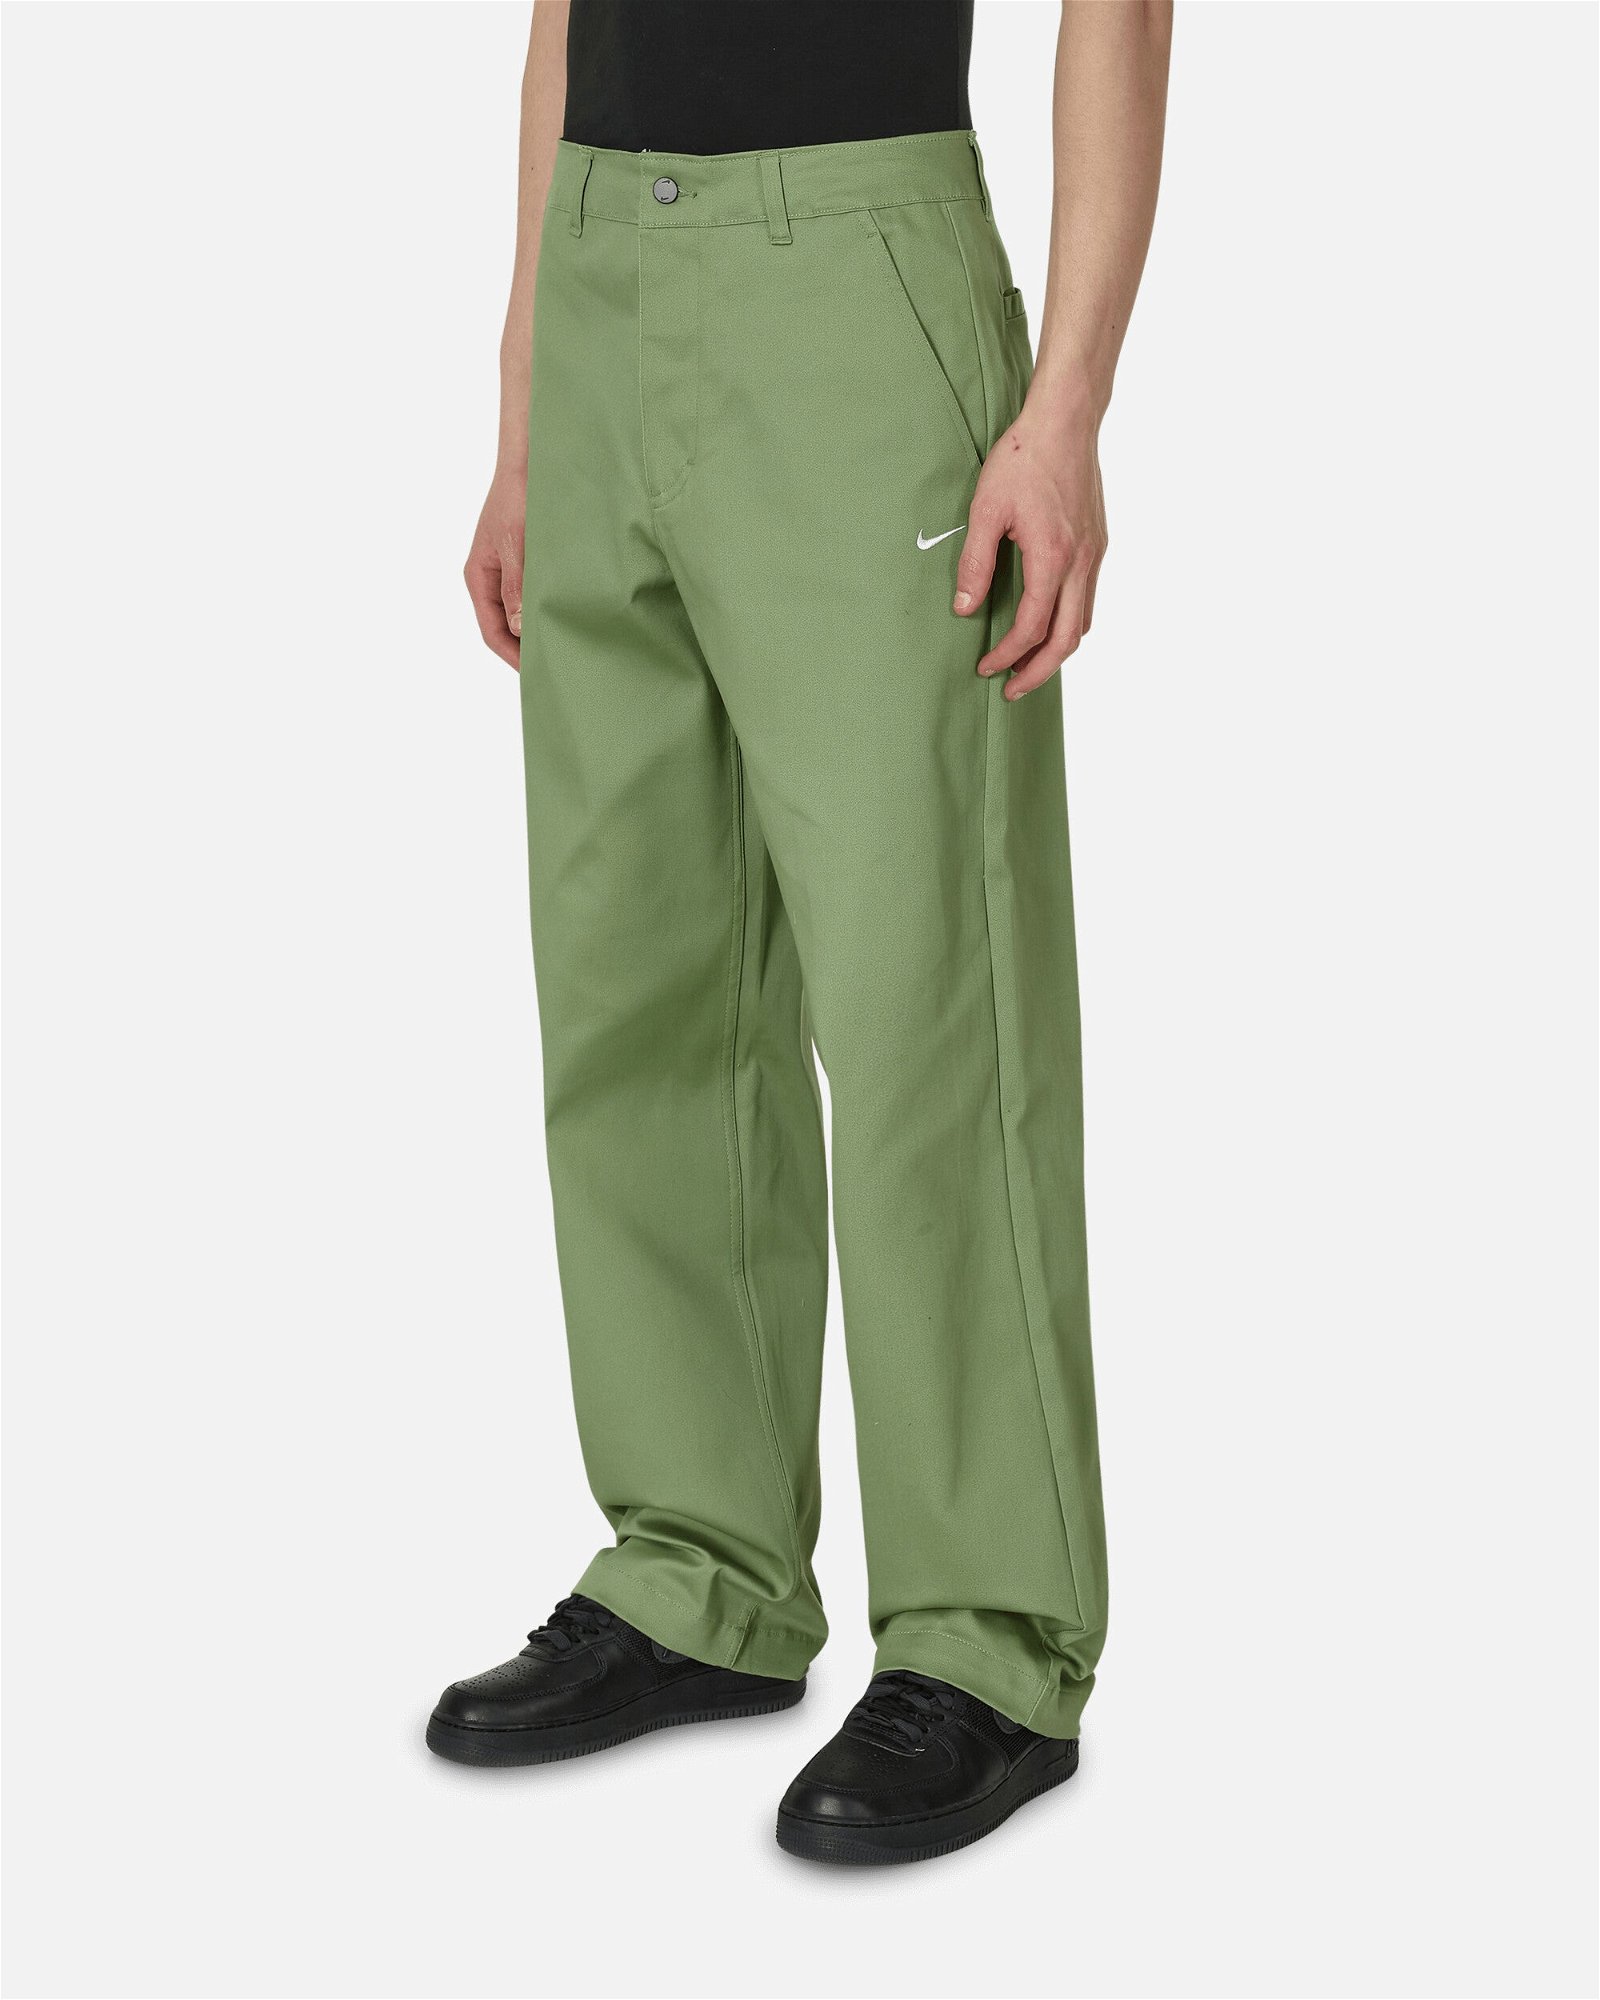 El Chino Trousers